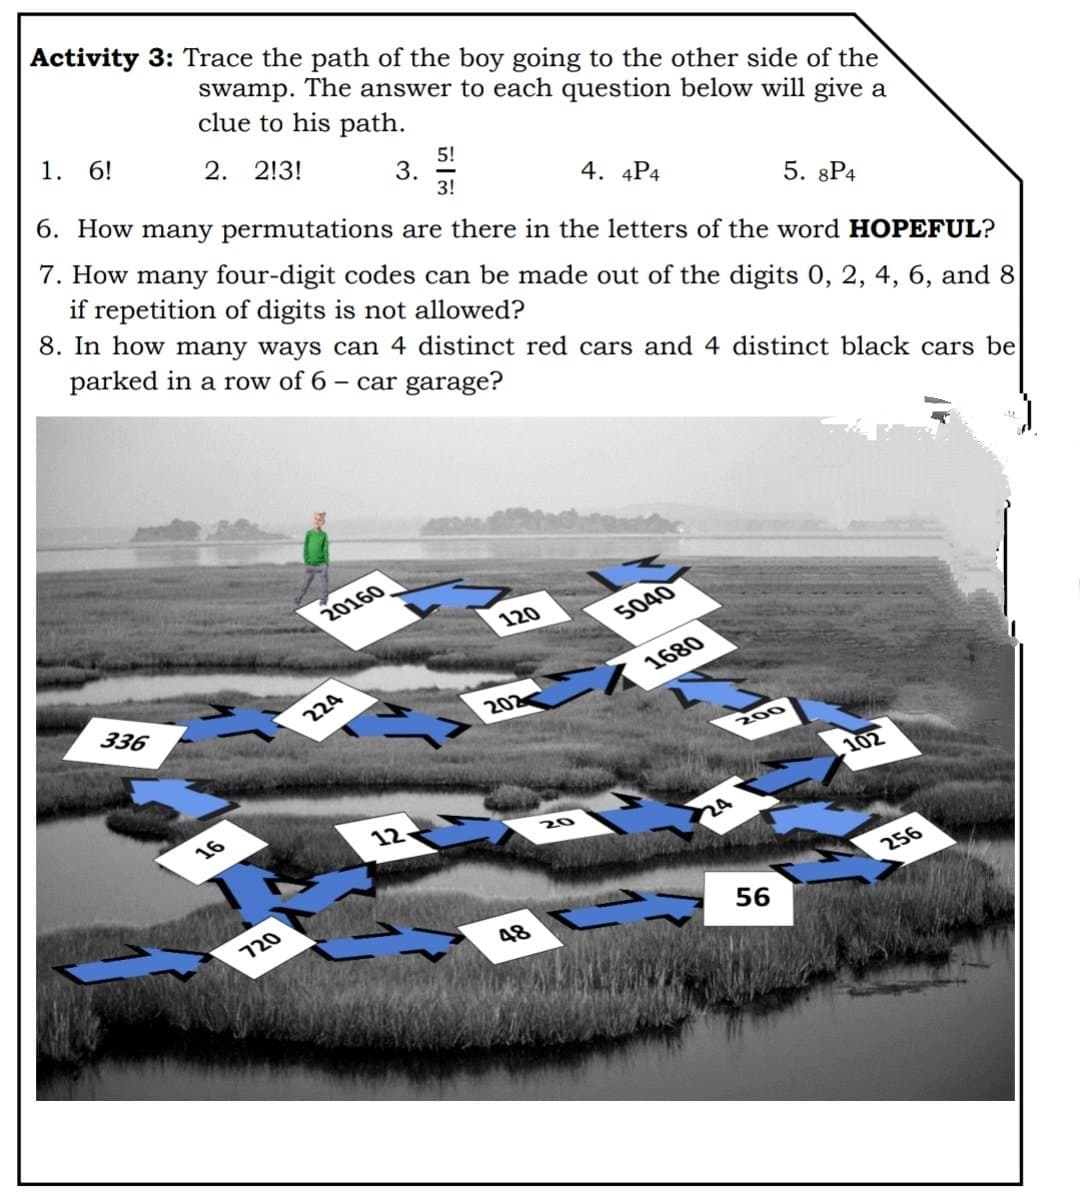 Activity 3: Trace the path of the boy going to the other side of the
swamp.
The answer to each question below will give a
clue to his path.
1. 6!
2. 2!3!
5!
3.
3!
6. How many permutations are there in the letters of the word HOPEFUL?
4. 4P4
if repetition of digits is not allowed?
8. In how many ways can 4 distinct red cars and 4 distinct black cars be
7. How many four-digit codes can be made out of the digits 0, 2, 4, 6, and 8
5. 8P4
parked in a row of 6
- car garage?
20160
120
5040
336
1680
224
202
200
102
16
12
20
24
256
120
48
56
